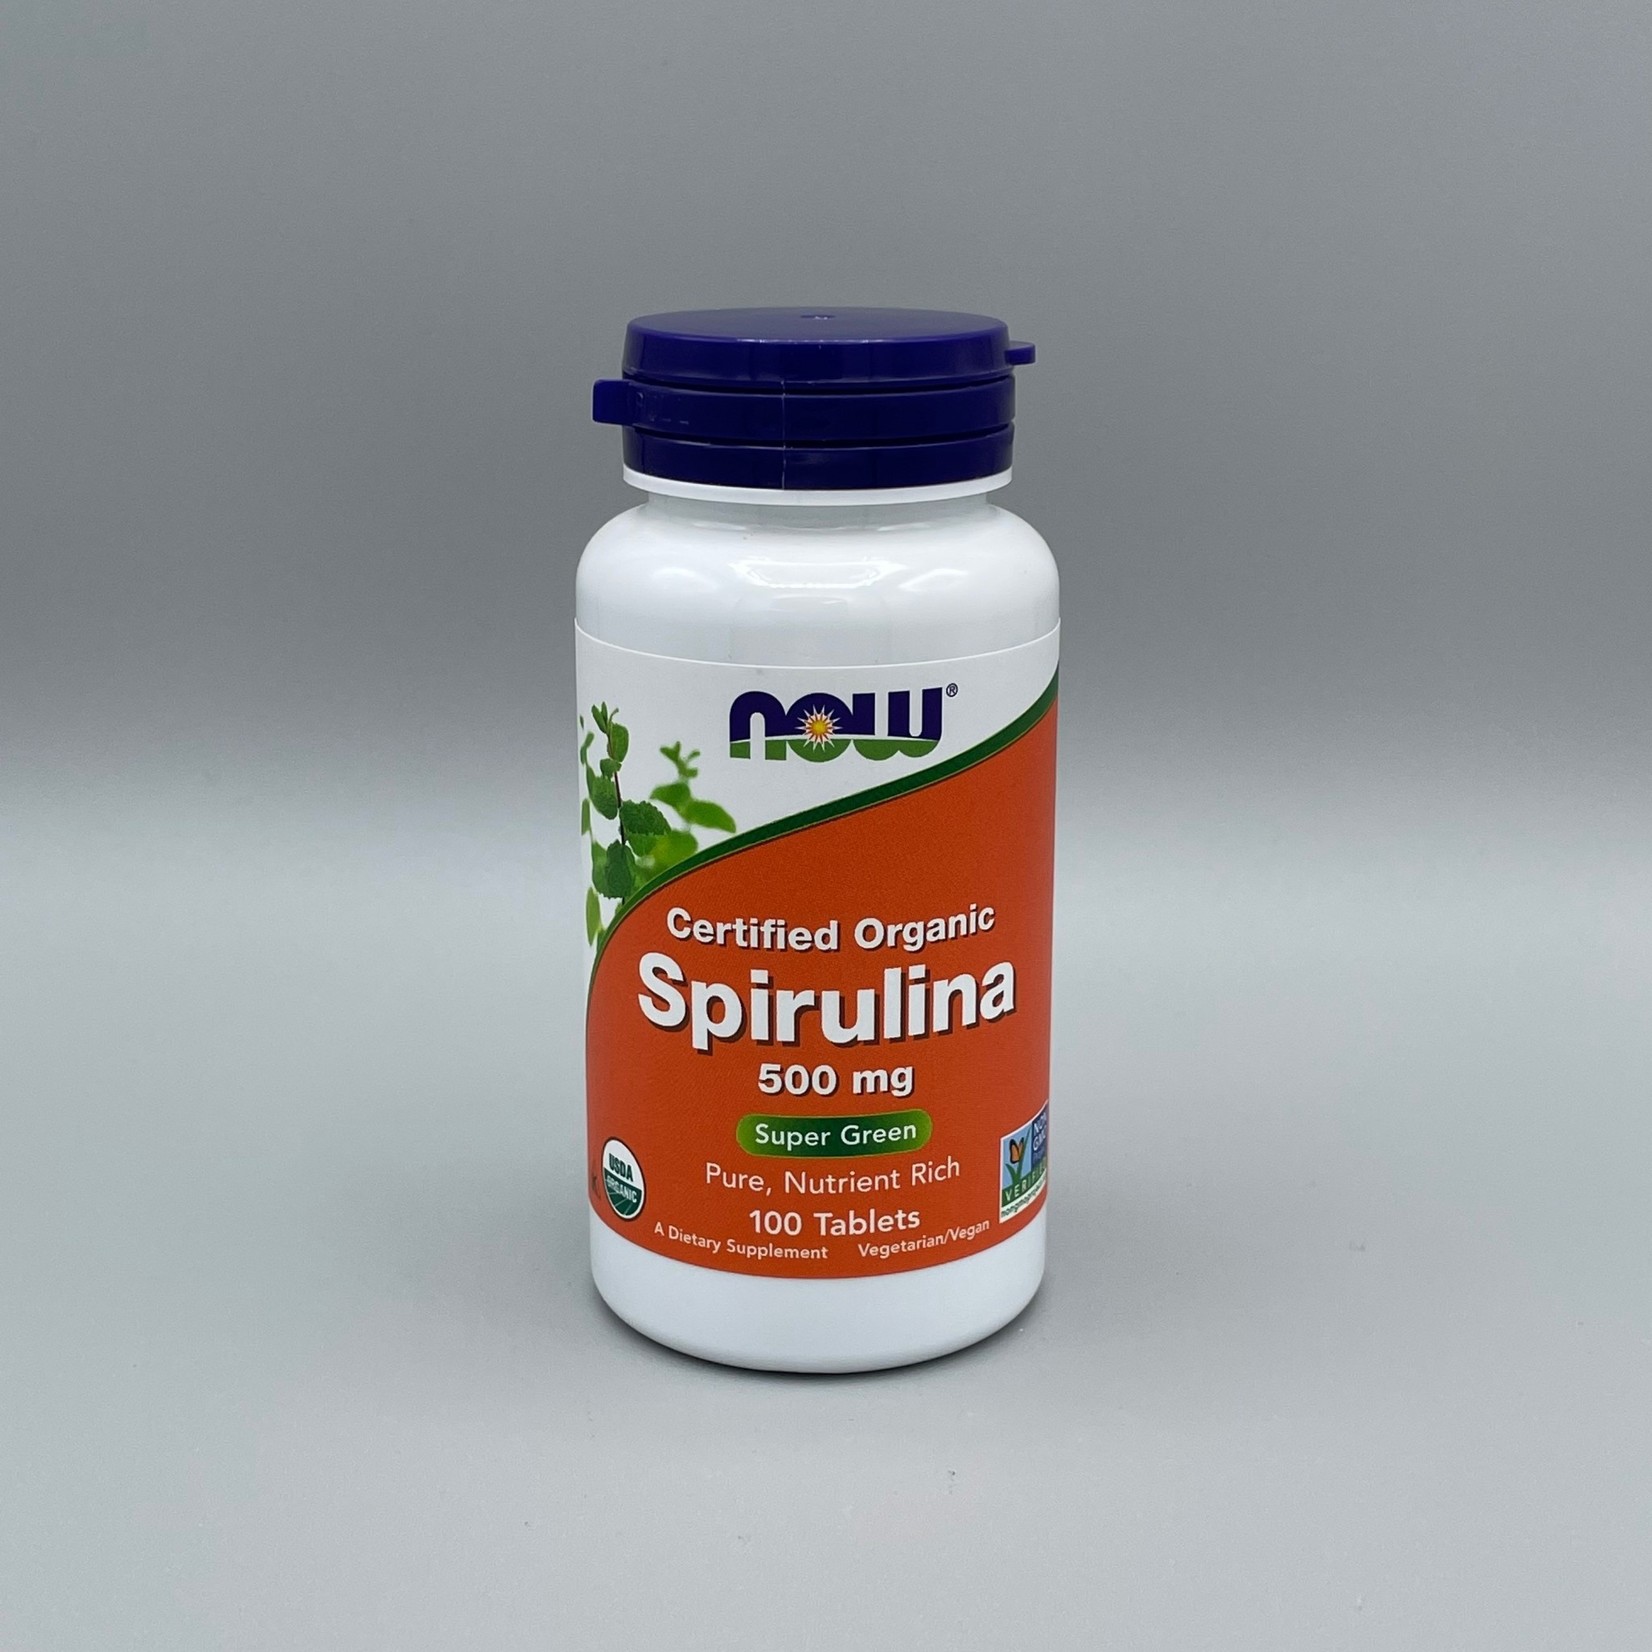 NOW NOW Spirulina (Certified Organic) - 500 mg, 100 Tablets